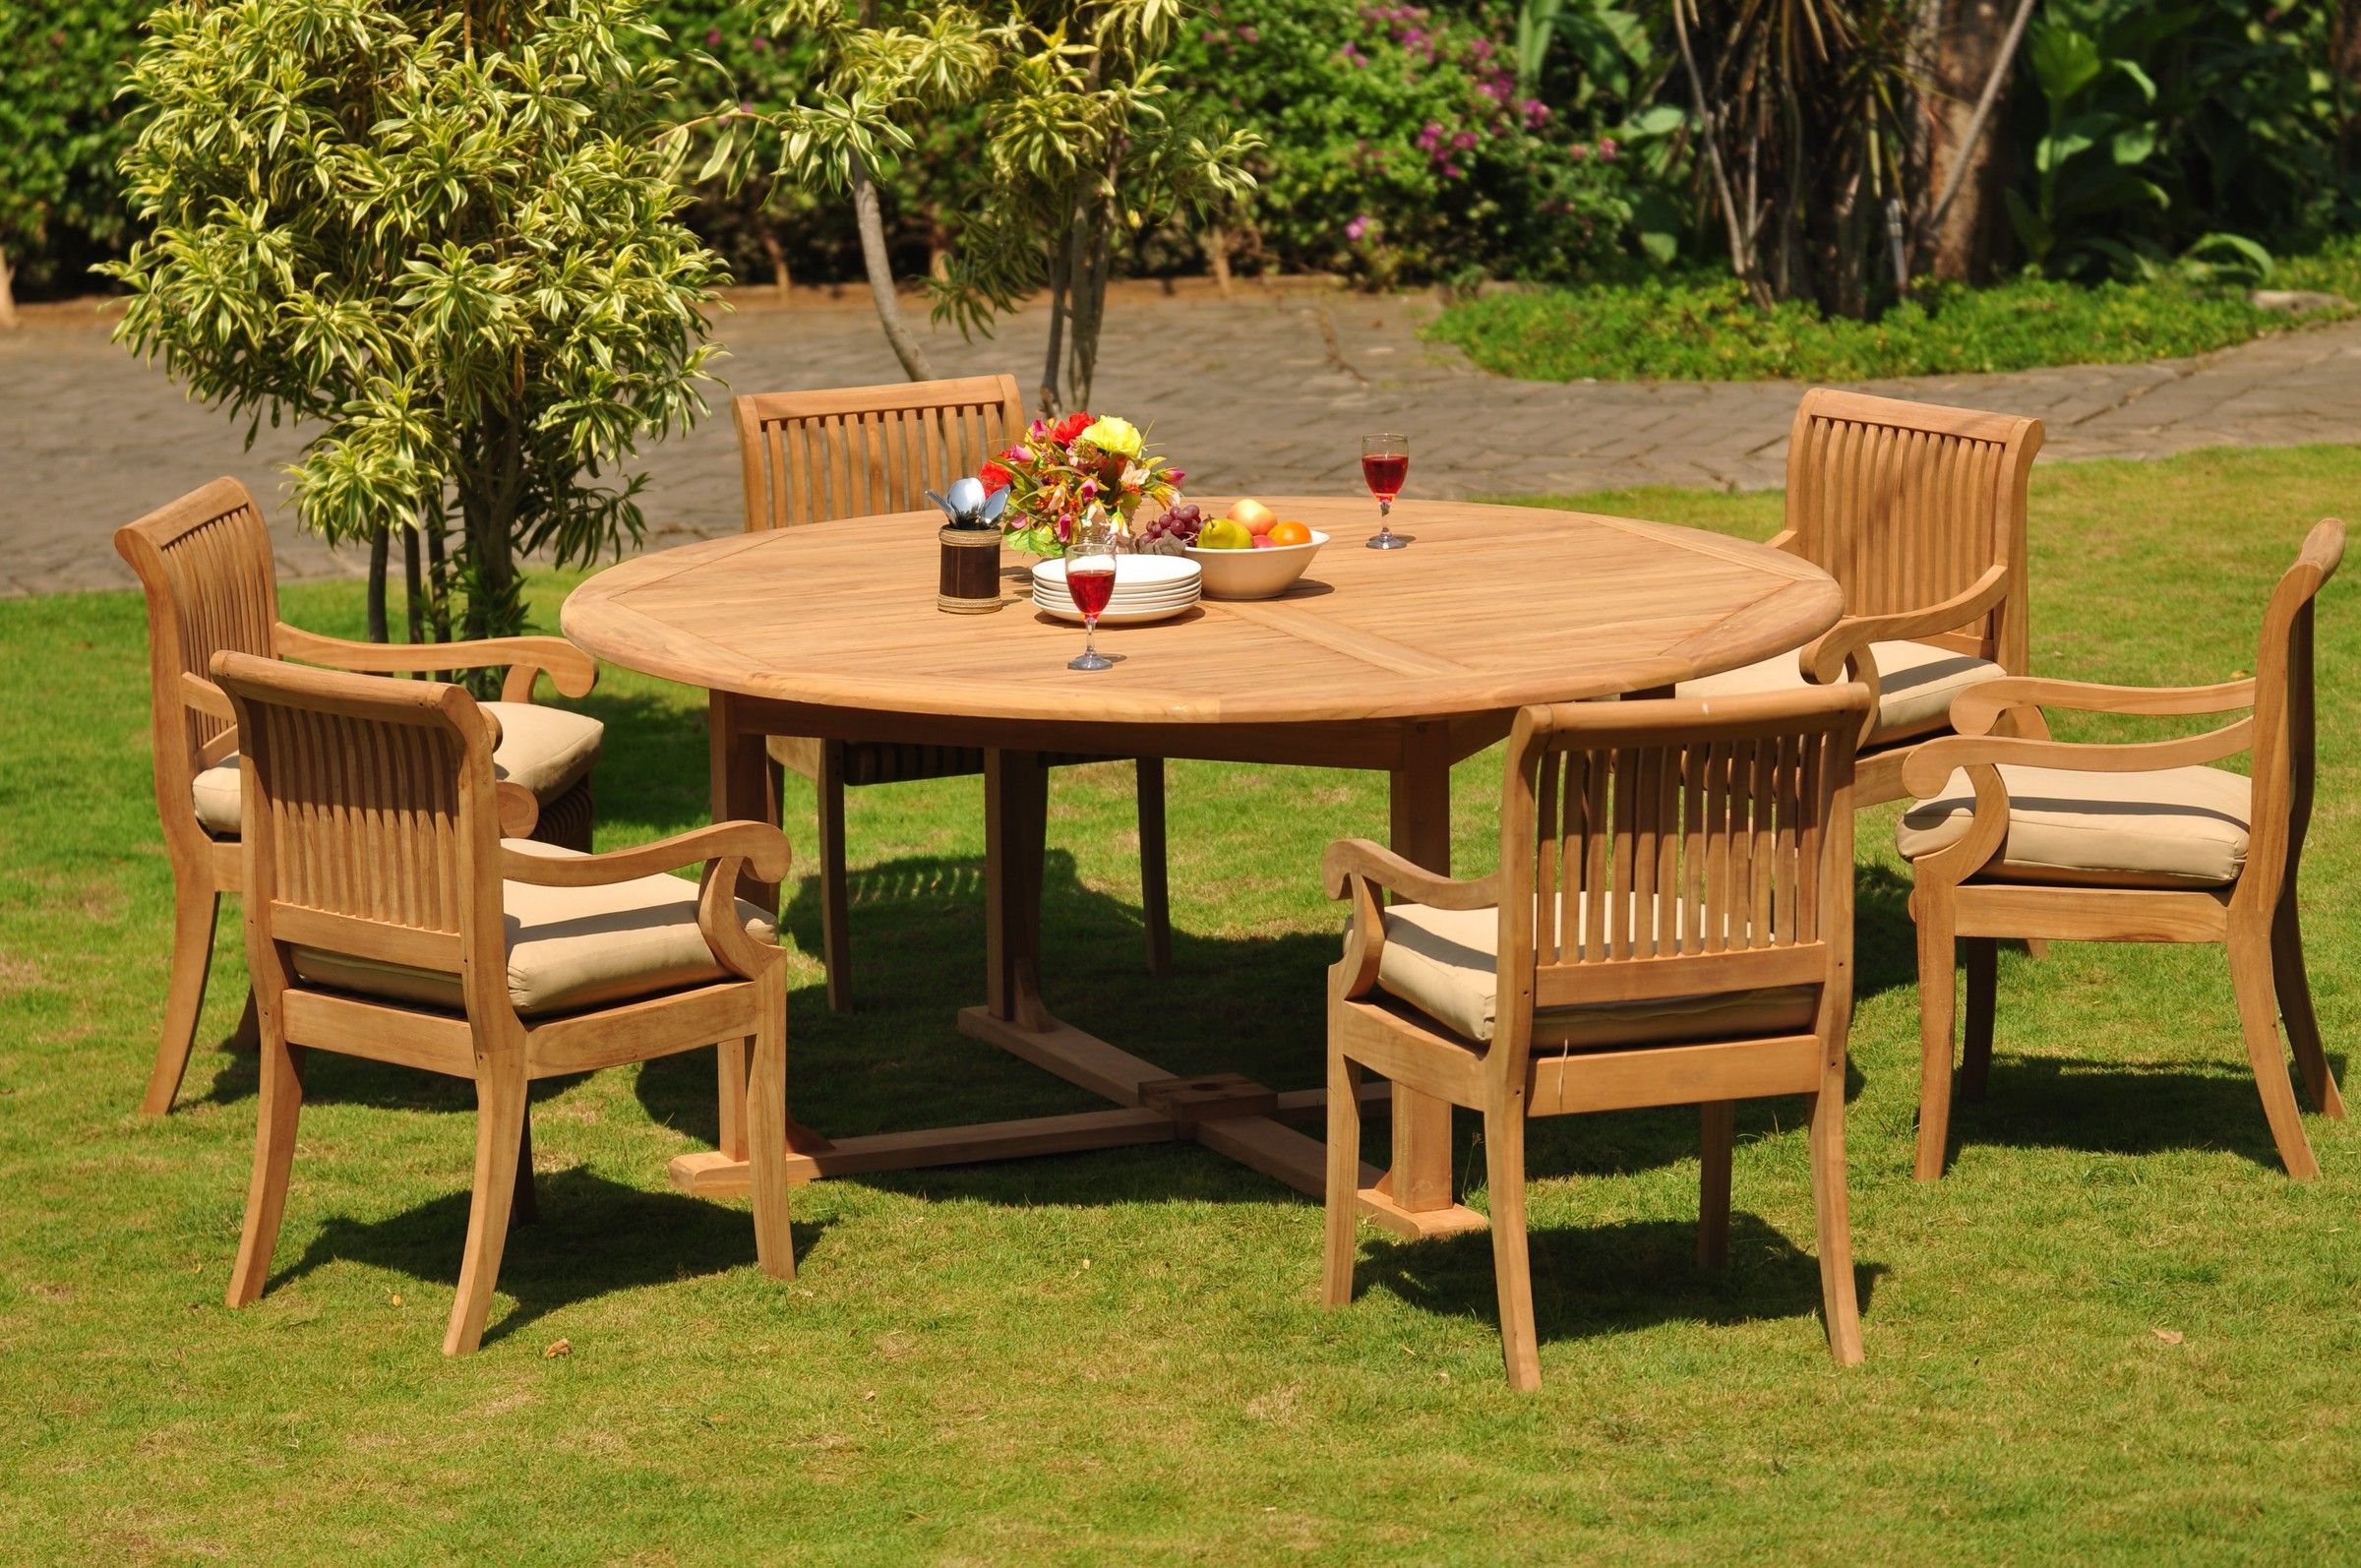 Well Liked Teak Outdoor Loungers Sets Pertaining To Teak Dining Set: 6 Seater 7 Pc: 72" Round Table And 6 Giva Arm Chairs (View 1 of 15)